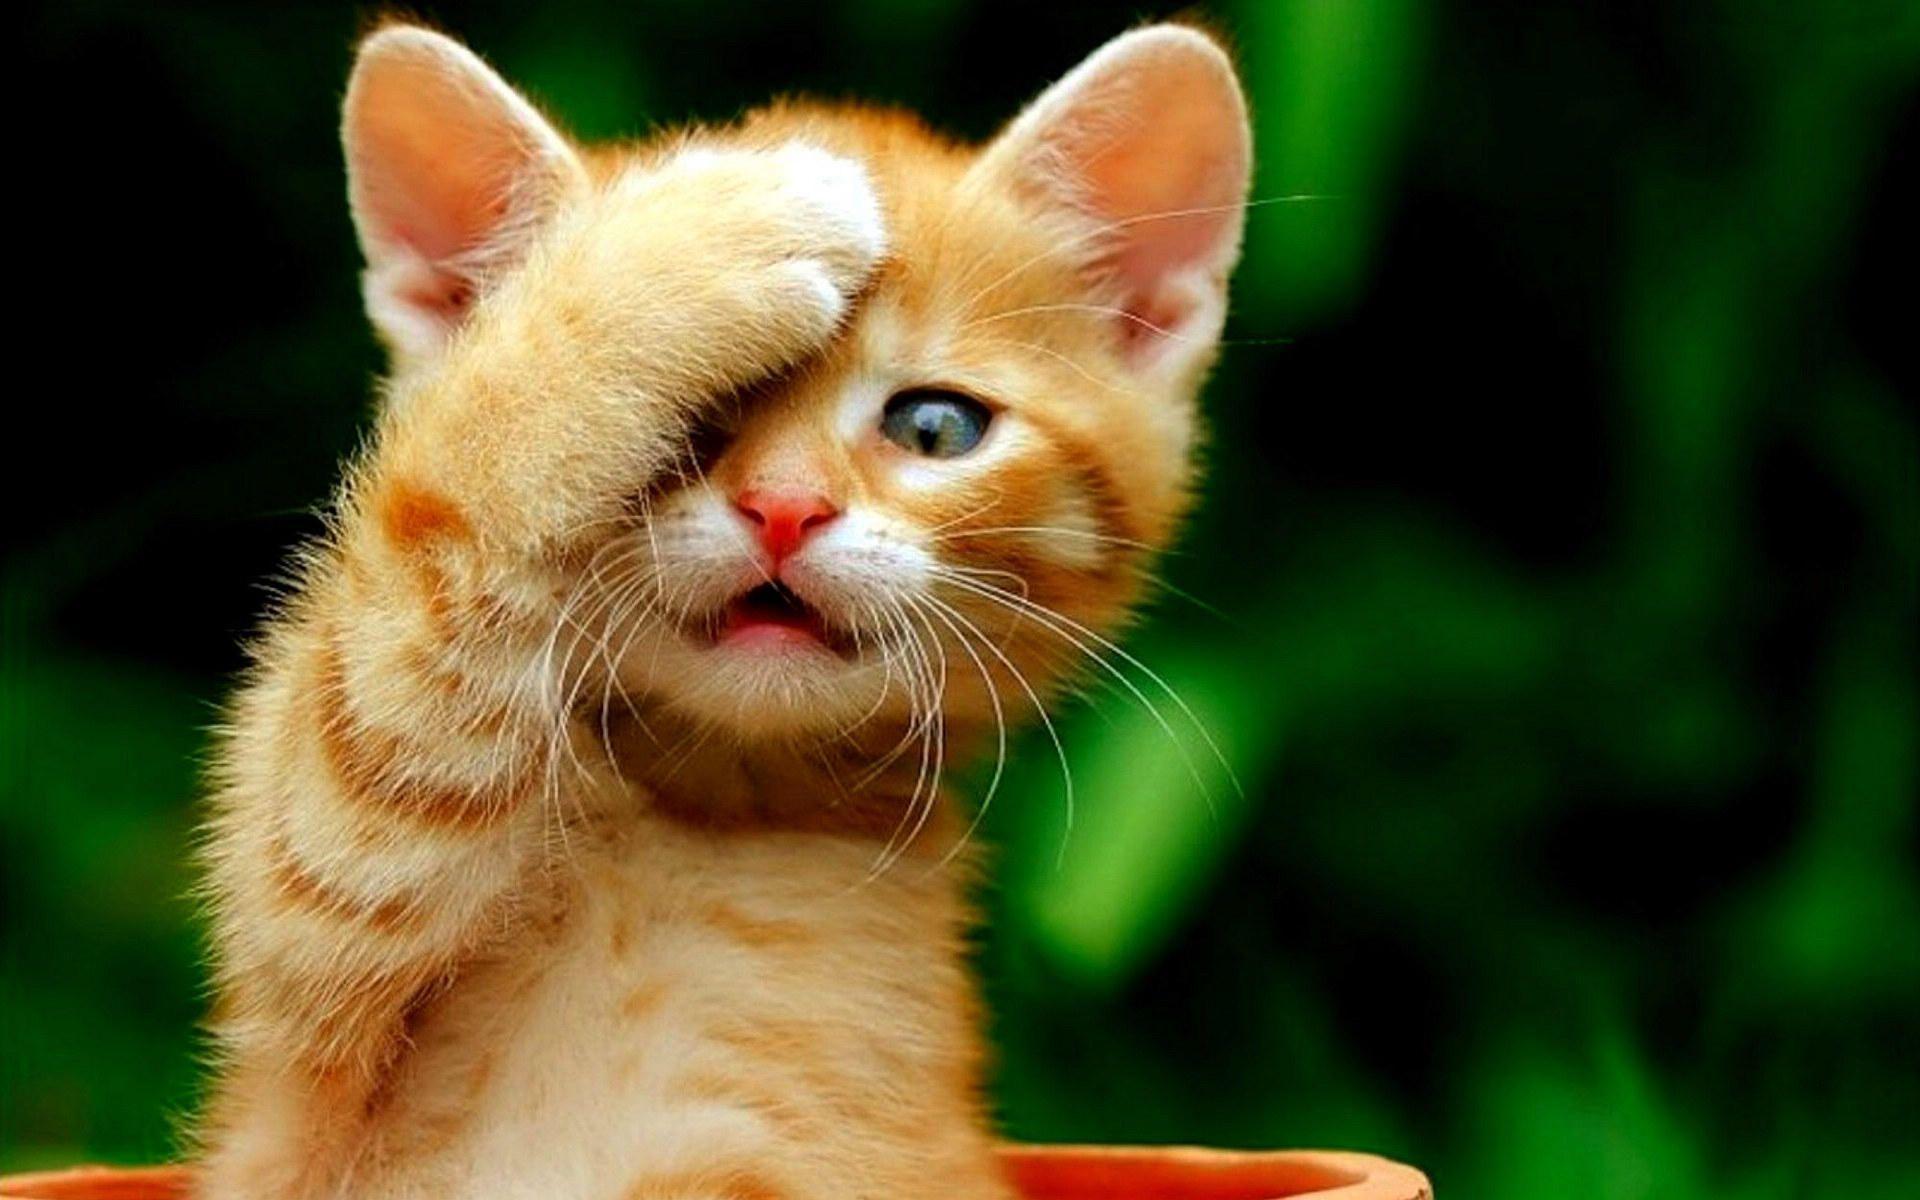 Cute Cat Image Hd Wallpapers Picture Wallpictinfo 1920x1200PX